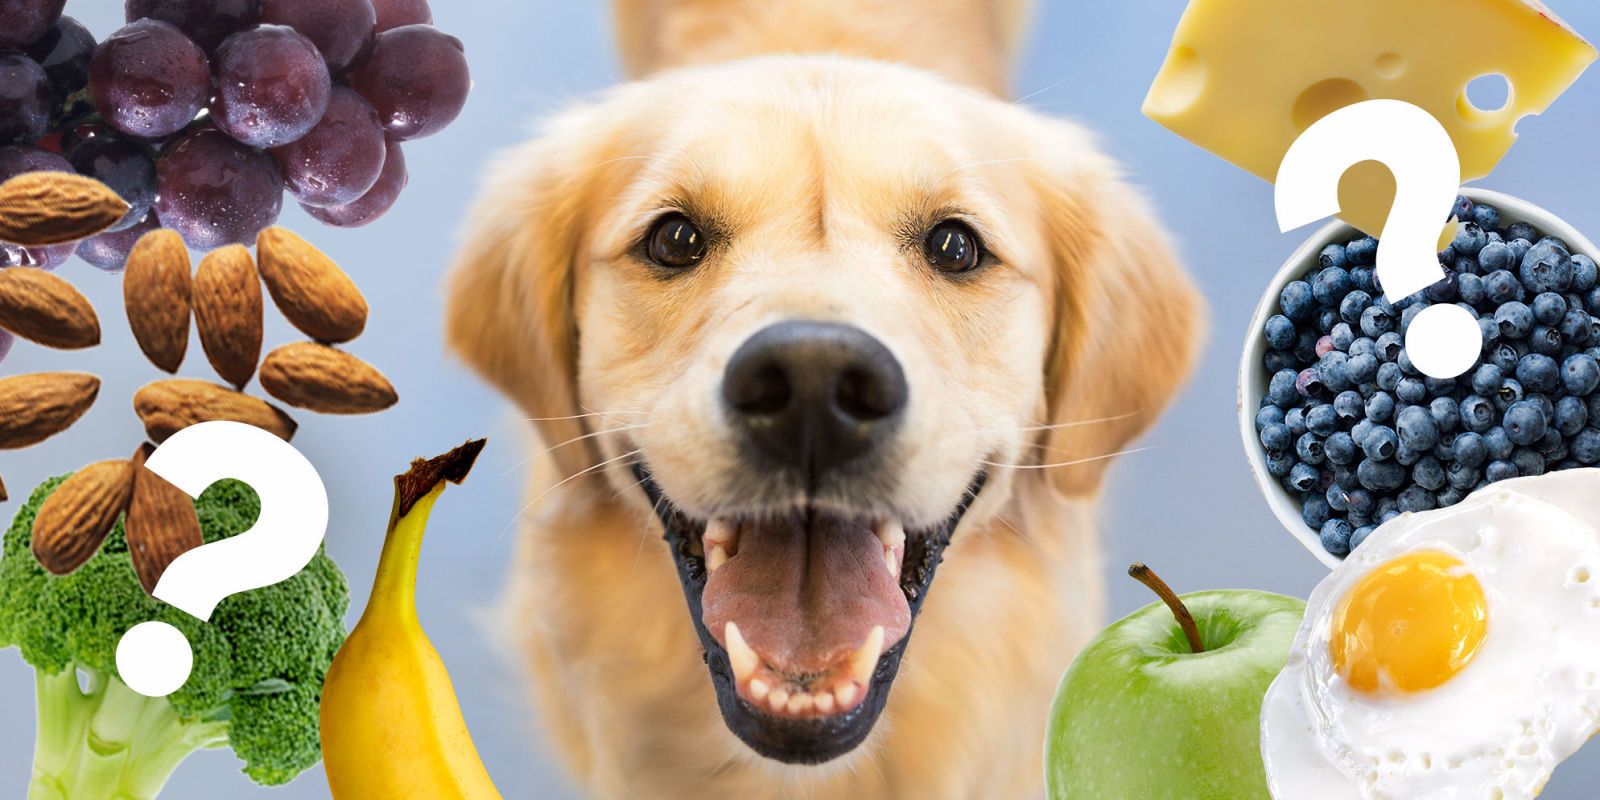 apple is good for dog